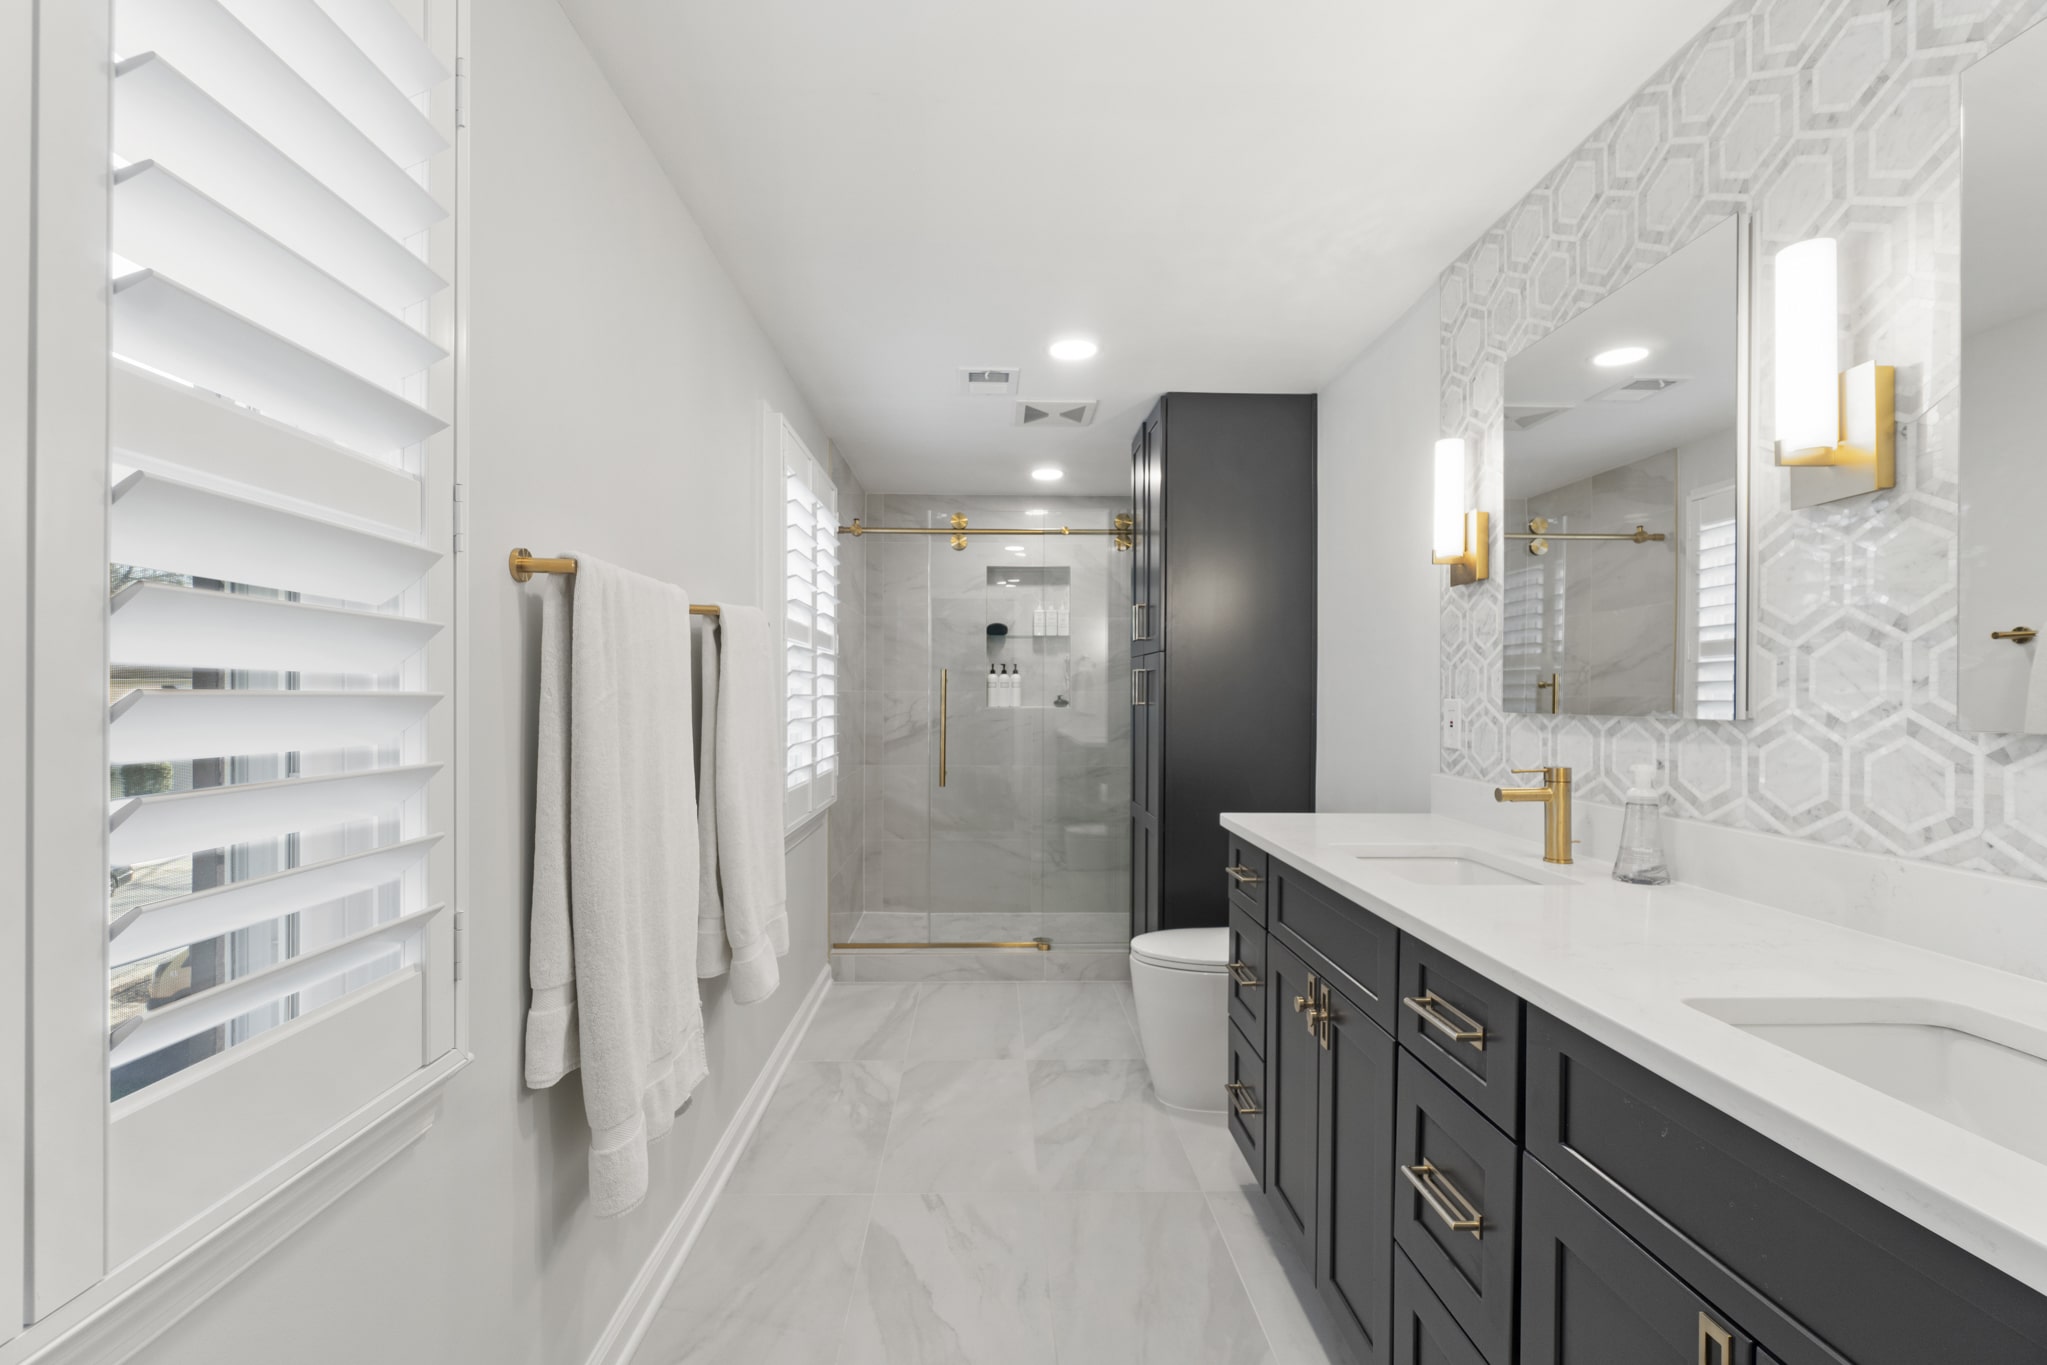 Luxury bathroom style with dark gray shaker cabinets, white countertop, toilet, and a shower